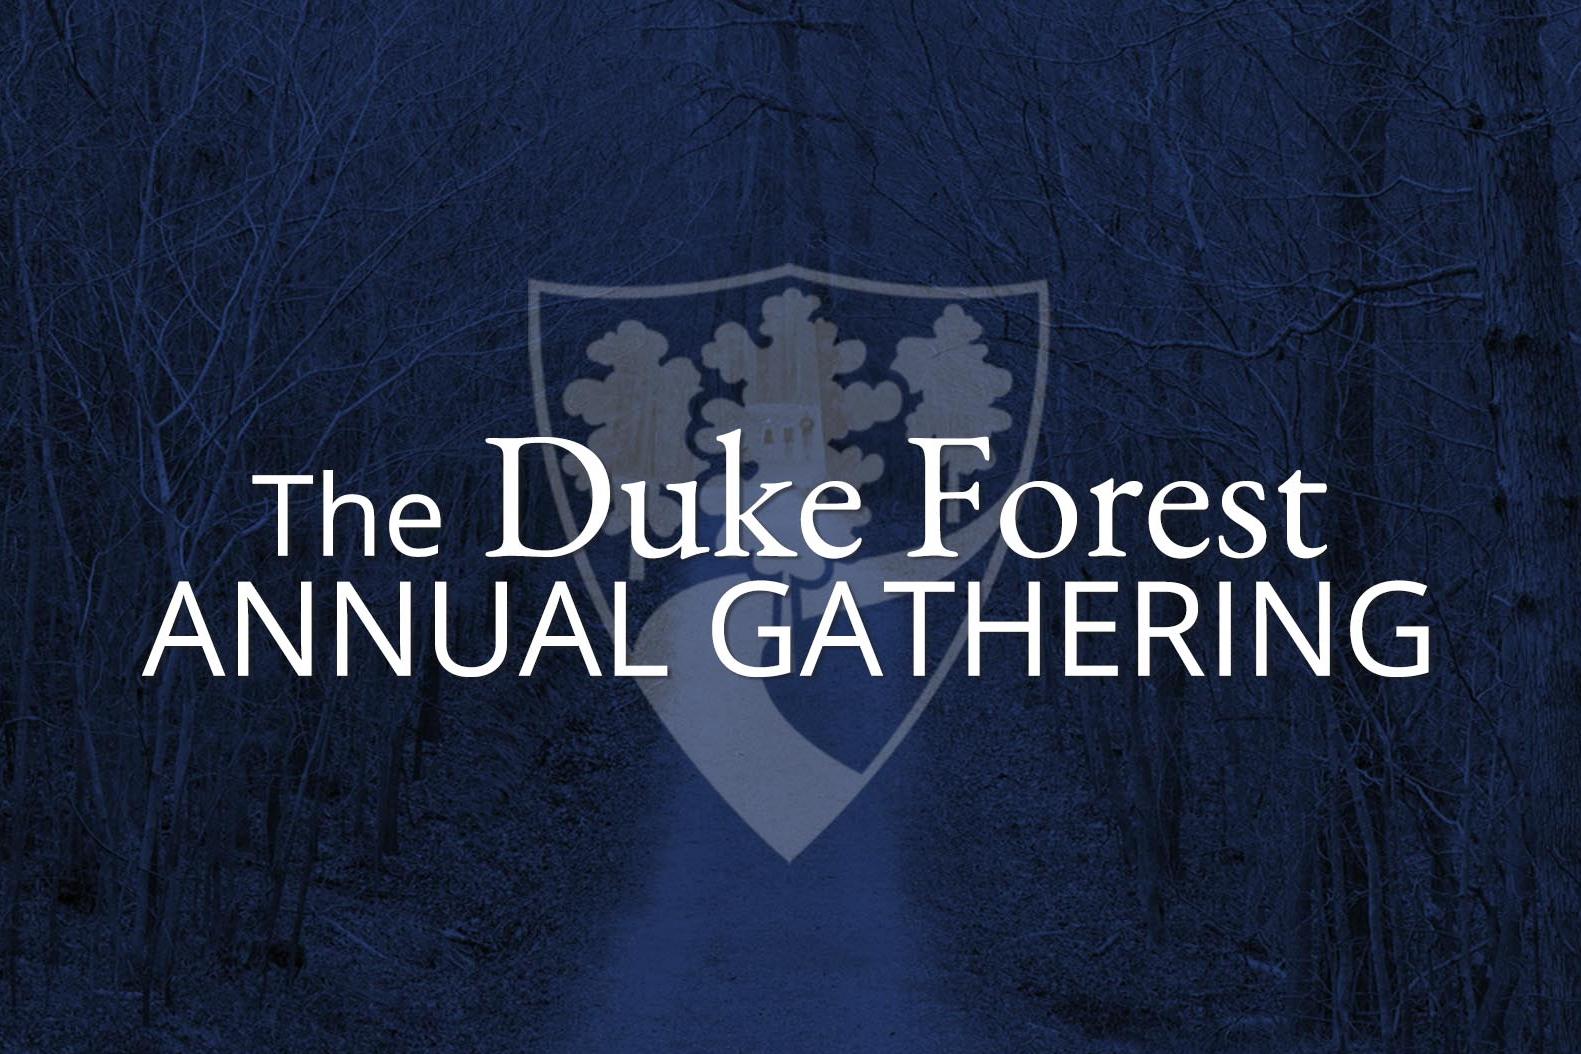 &quot;Duke Forest Annual Gathering&quot; with DF logo shield behind overlaid on woods image